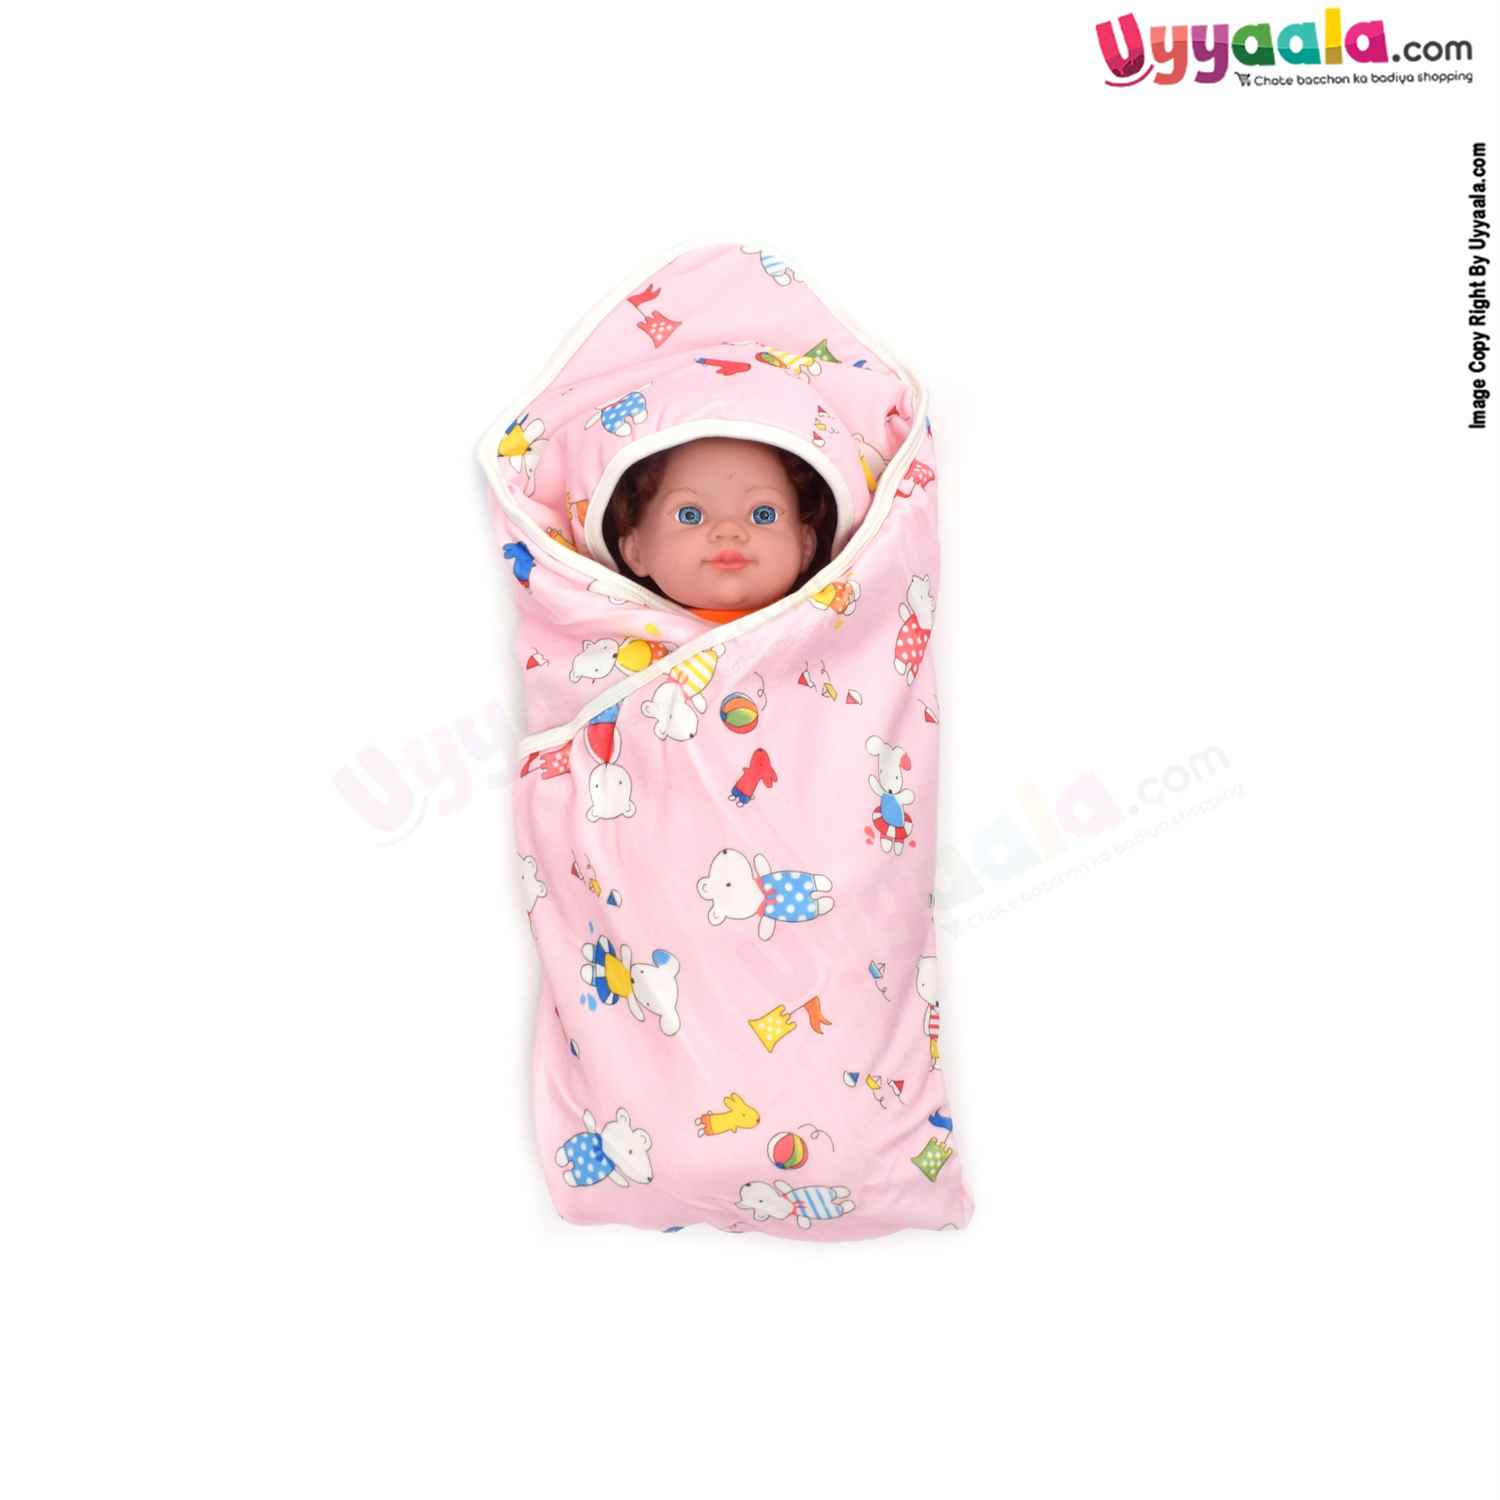 Double Layered (2 Ply) Hooded Blanket One Side Fur & Another Side Velvet with Animals Print for Babies 0-24m Age, Size(74*74cm)- Light Pink